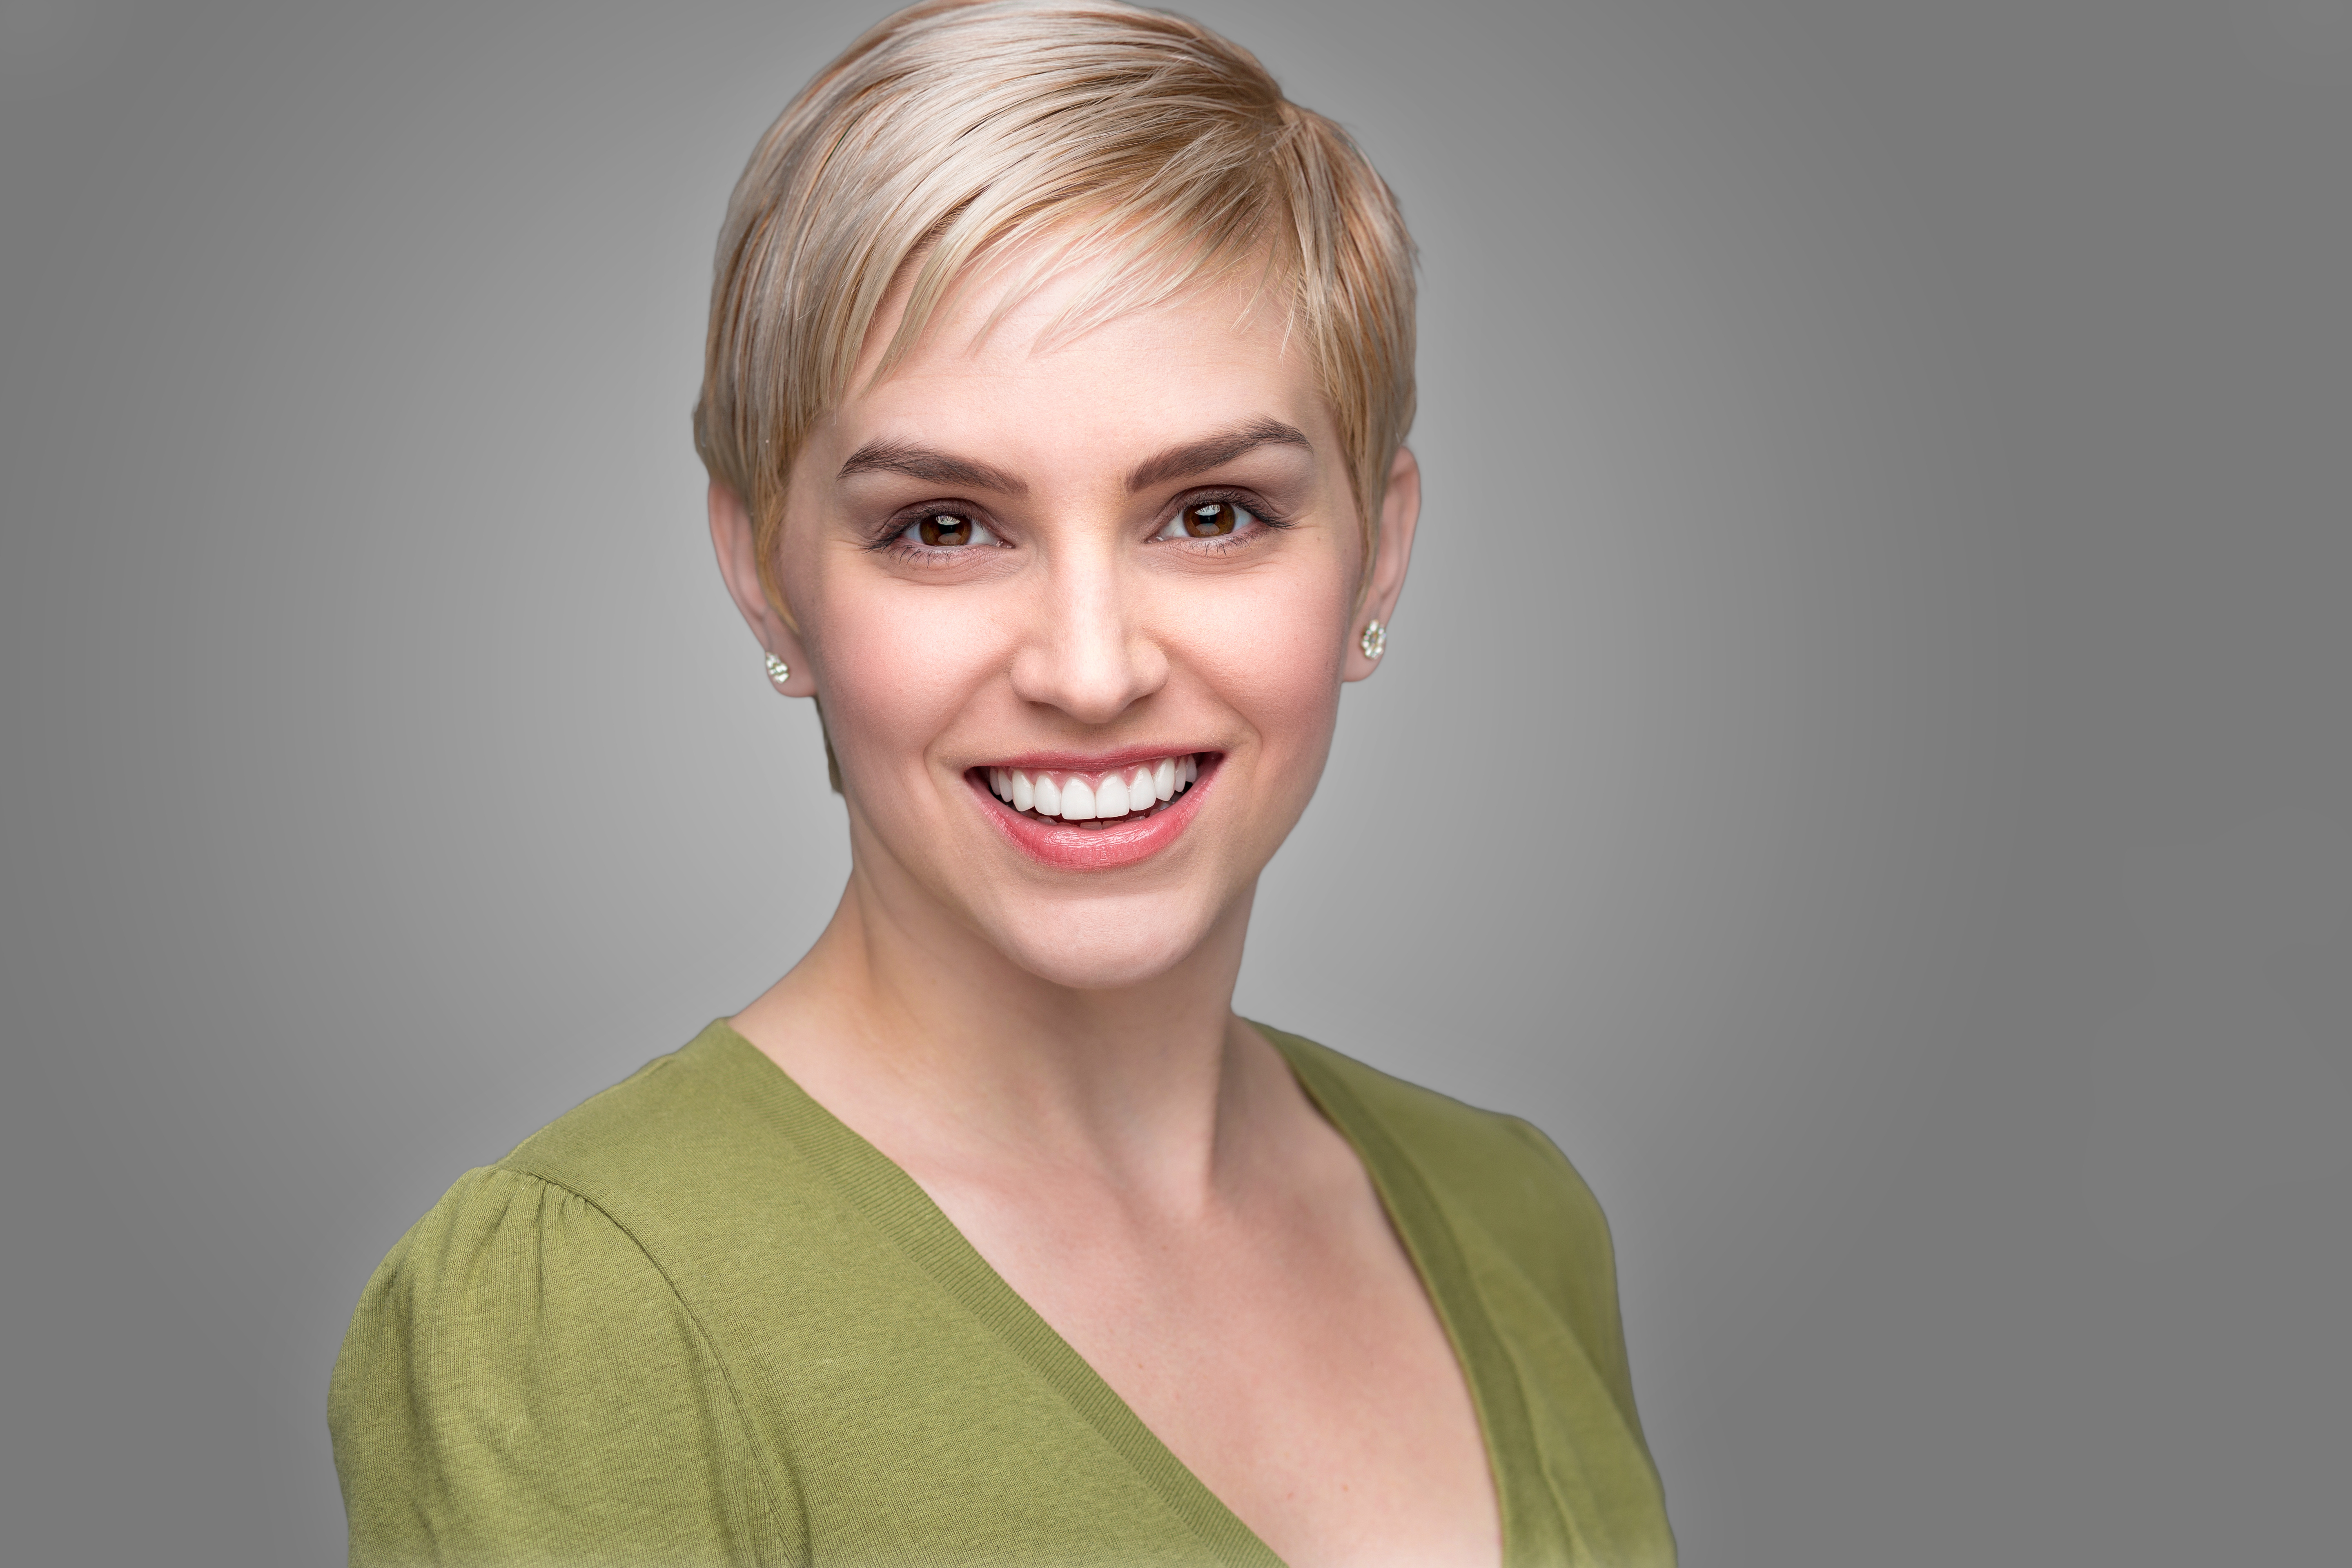 A woman with a blonde pixie cut hairstyle | Source: Shutterstock